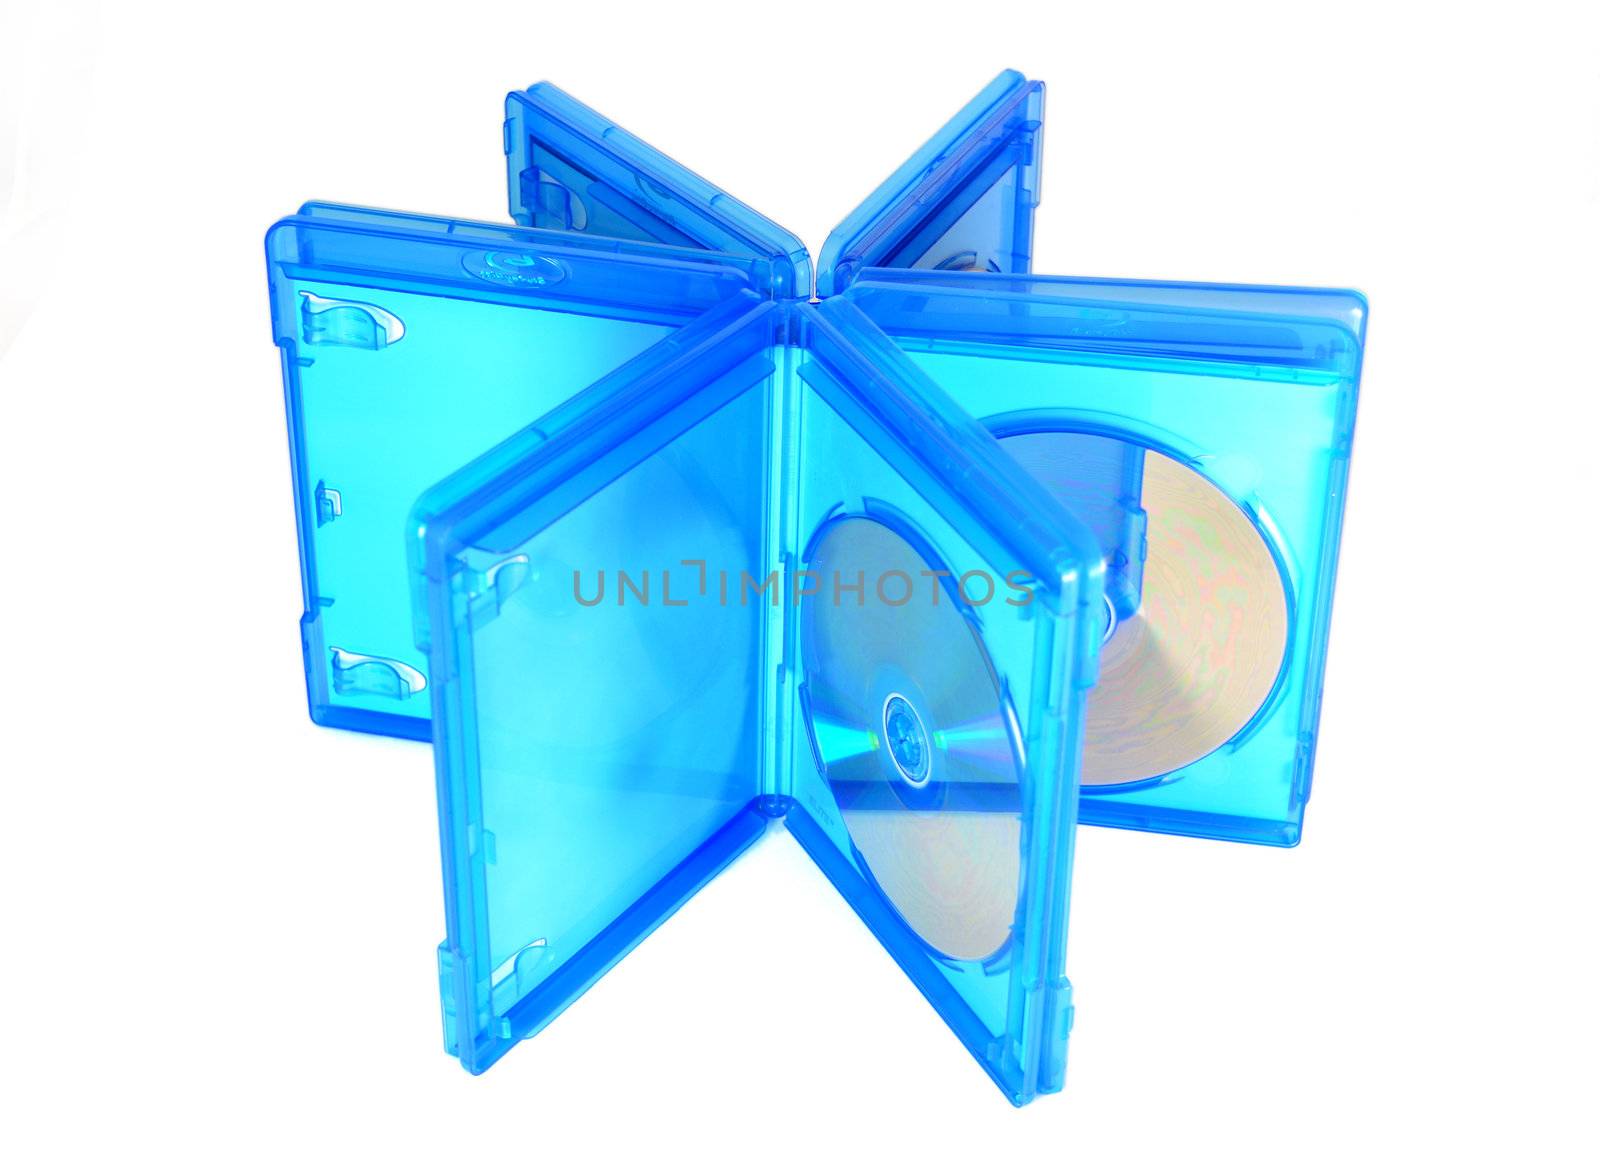 Blu Ray disc cases open by artofphoto